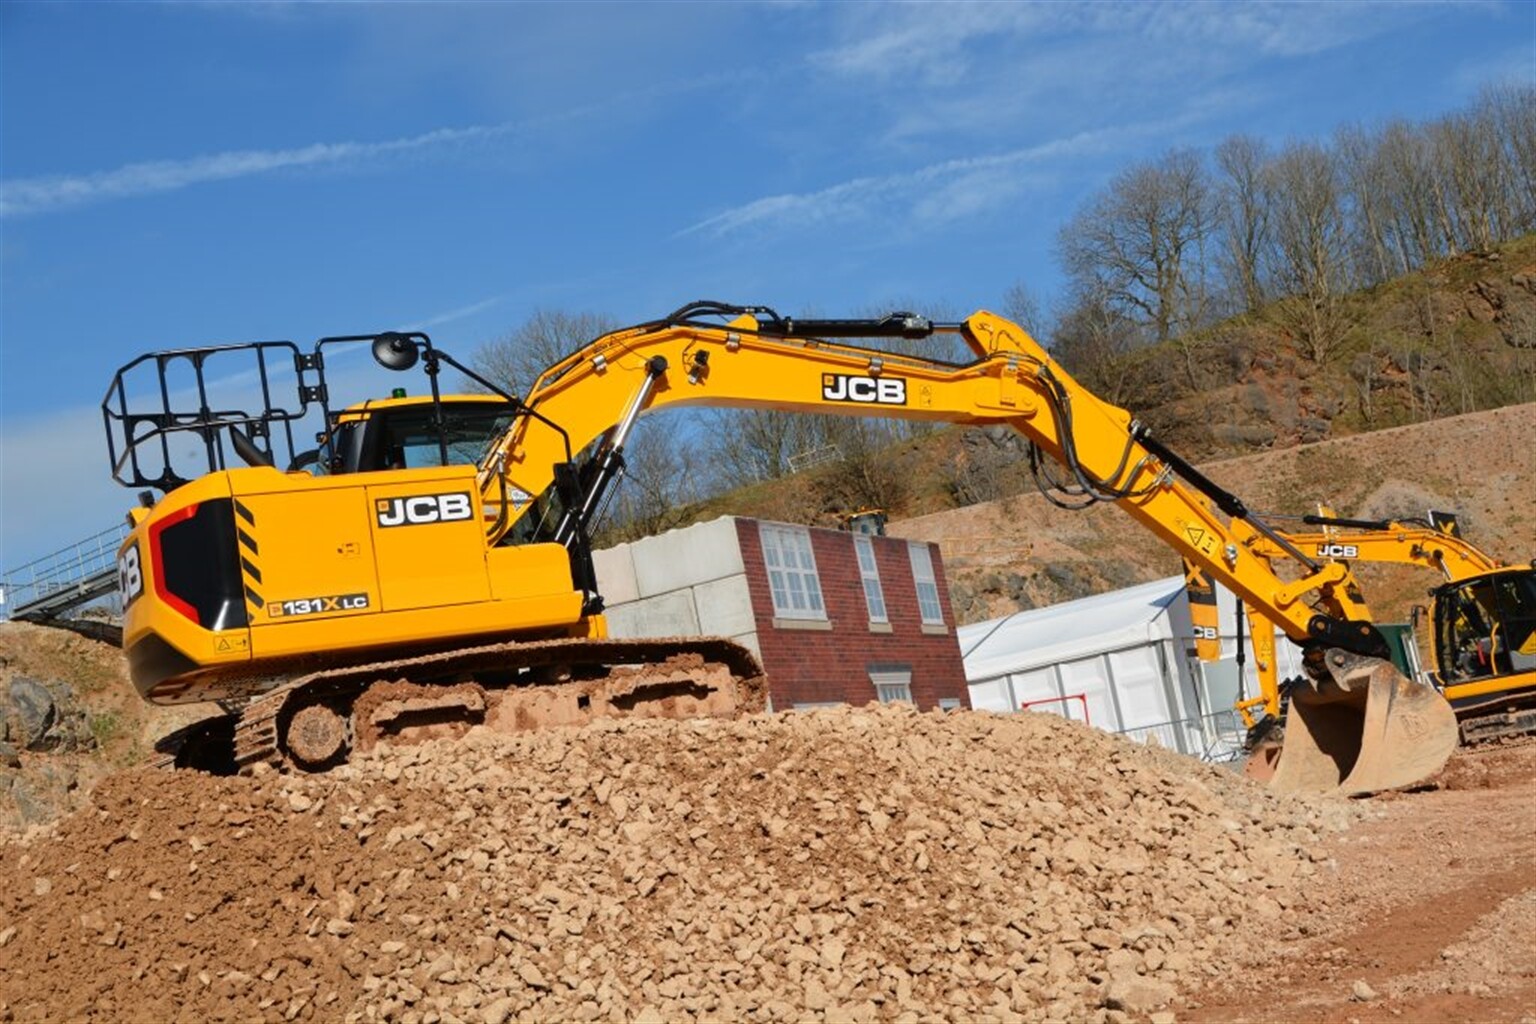 Public Debut for New JCB X-Series Models at Plantworx